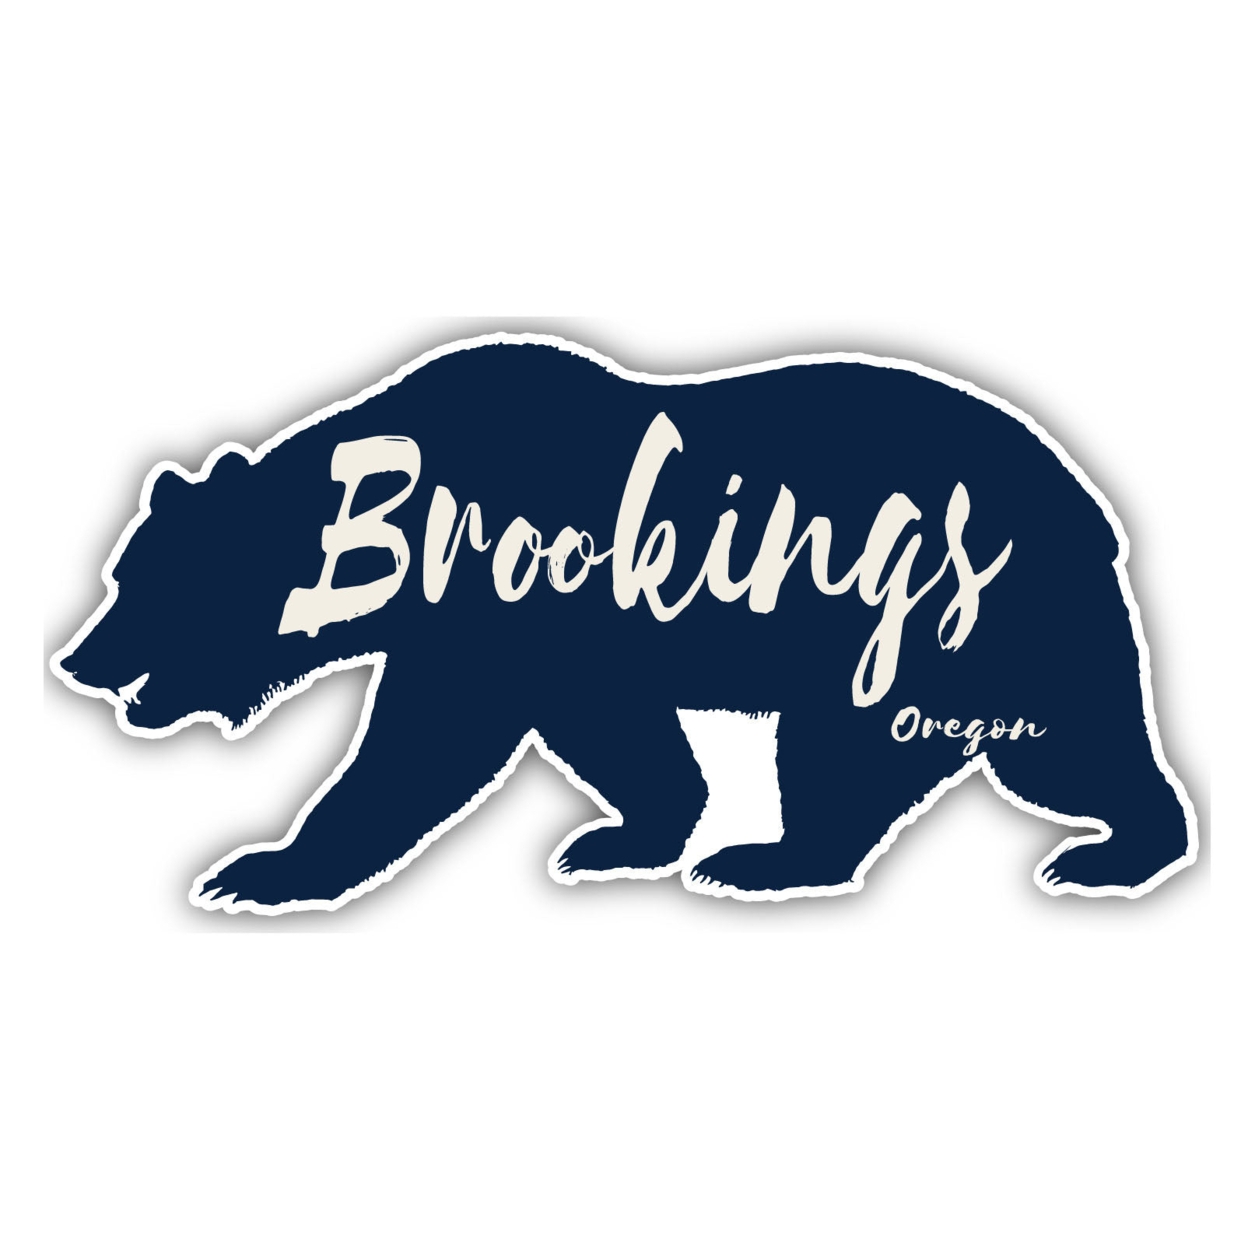 Brookings Oregon Souvenir Decorative Stickers (Choose Theme And Size) - 4-Pack, 6-Inch, Bear